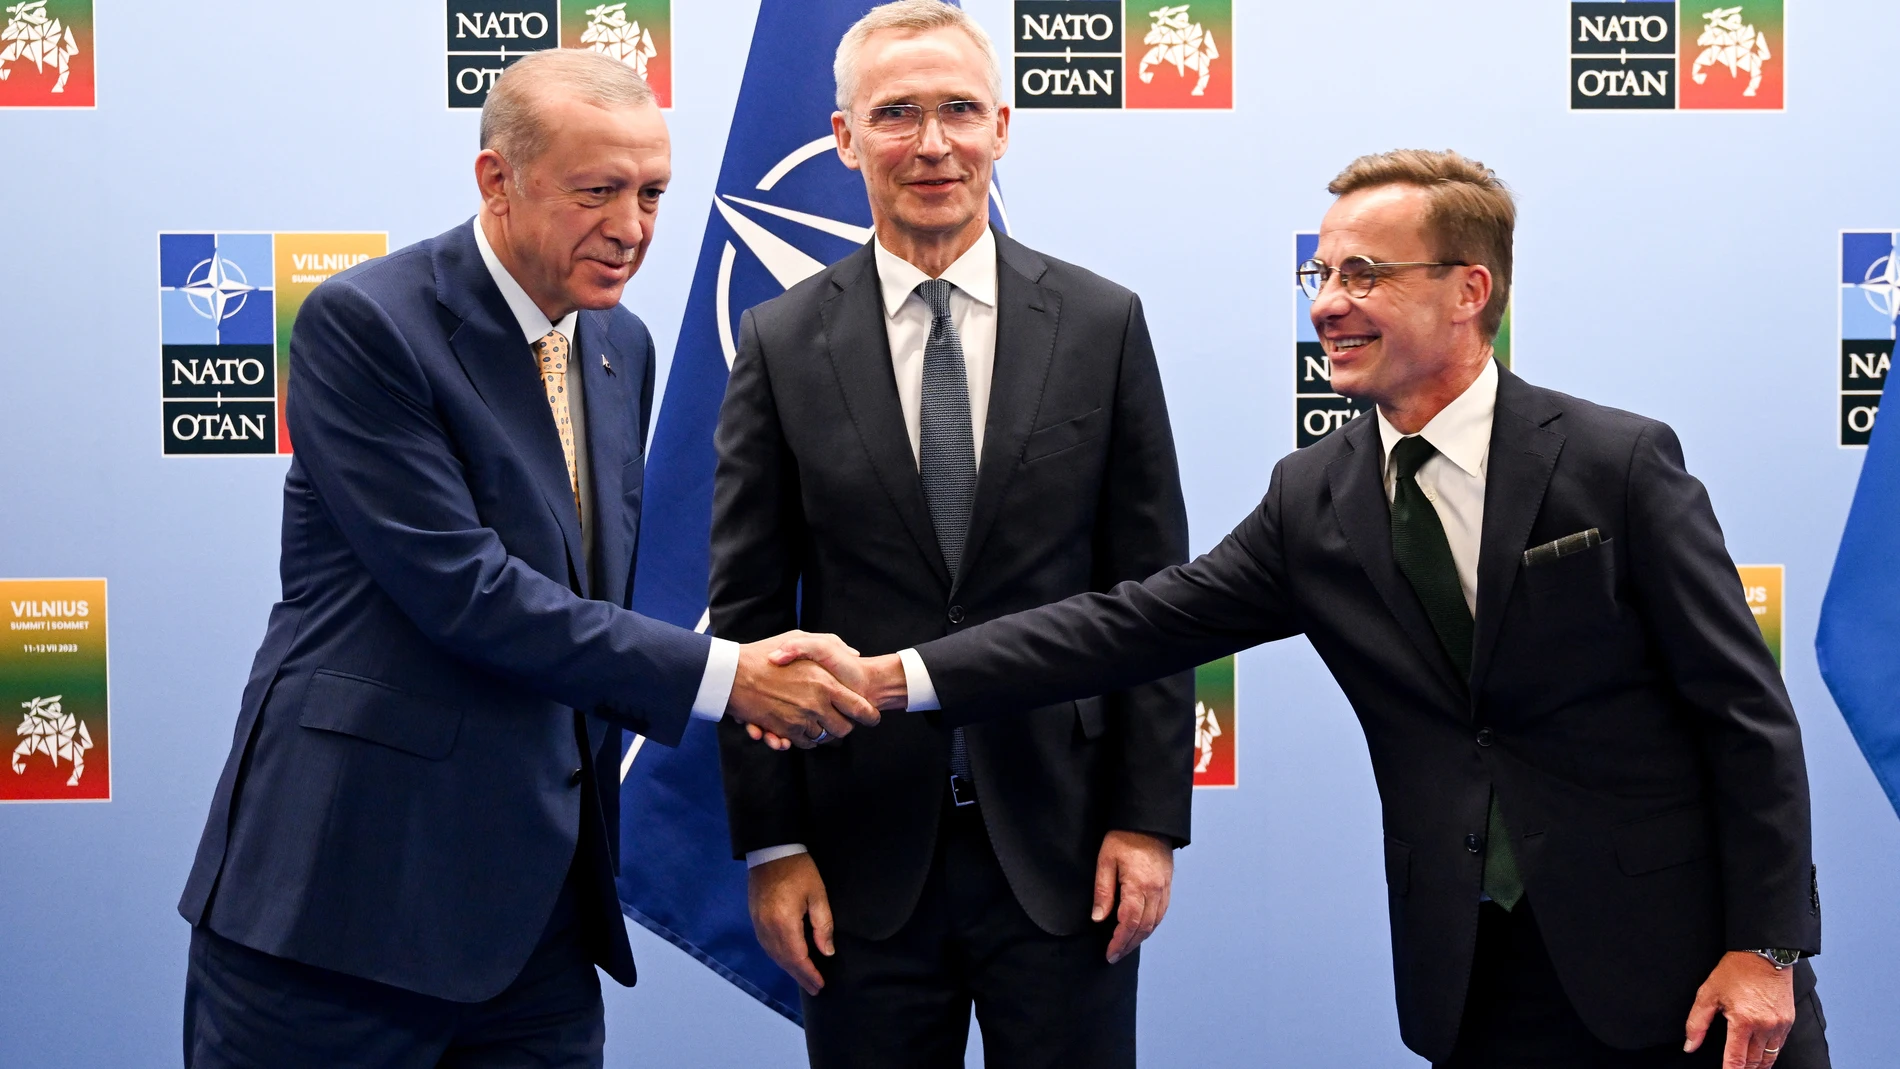 Vilnius (Lithuania), 10/07/2023.- Turkish President Recep Tayyip Erdogan (L) shakes hands with Swedish Prime Minister Ulf Kristersson (R) as the Secretary General of NATO Jens Stoltenberg (L) looks on during their meeting ahead of the NATO ?summit in Vilnius, Lithuania, 10 July 2023. The NATO Summit will take place in Vilnius on 11 and 12 July 2023 with the alliance's leaders expected to adopt new defense plans. (Lituania, Suecia, Turquía) EFE/EPA/FILIP SINGER / POOL